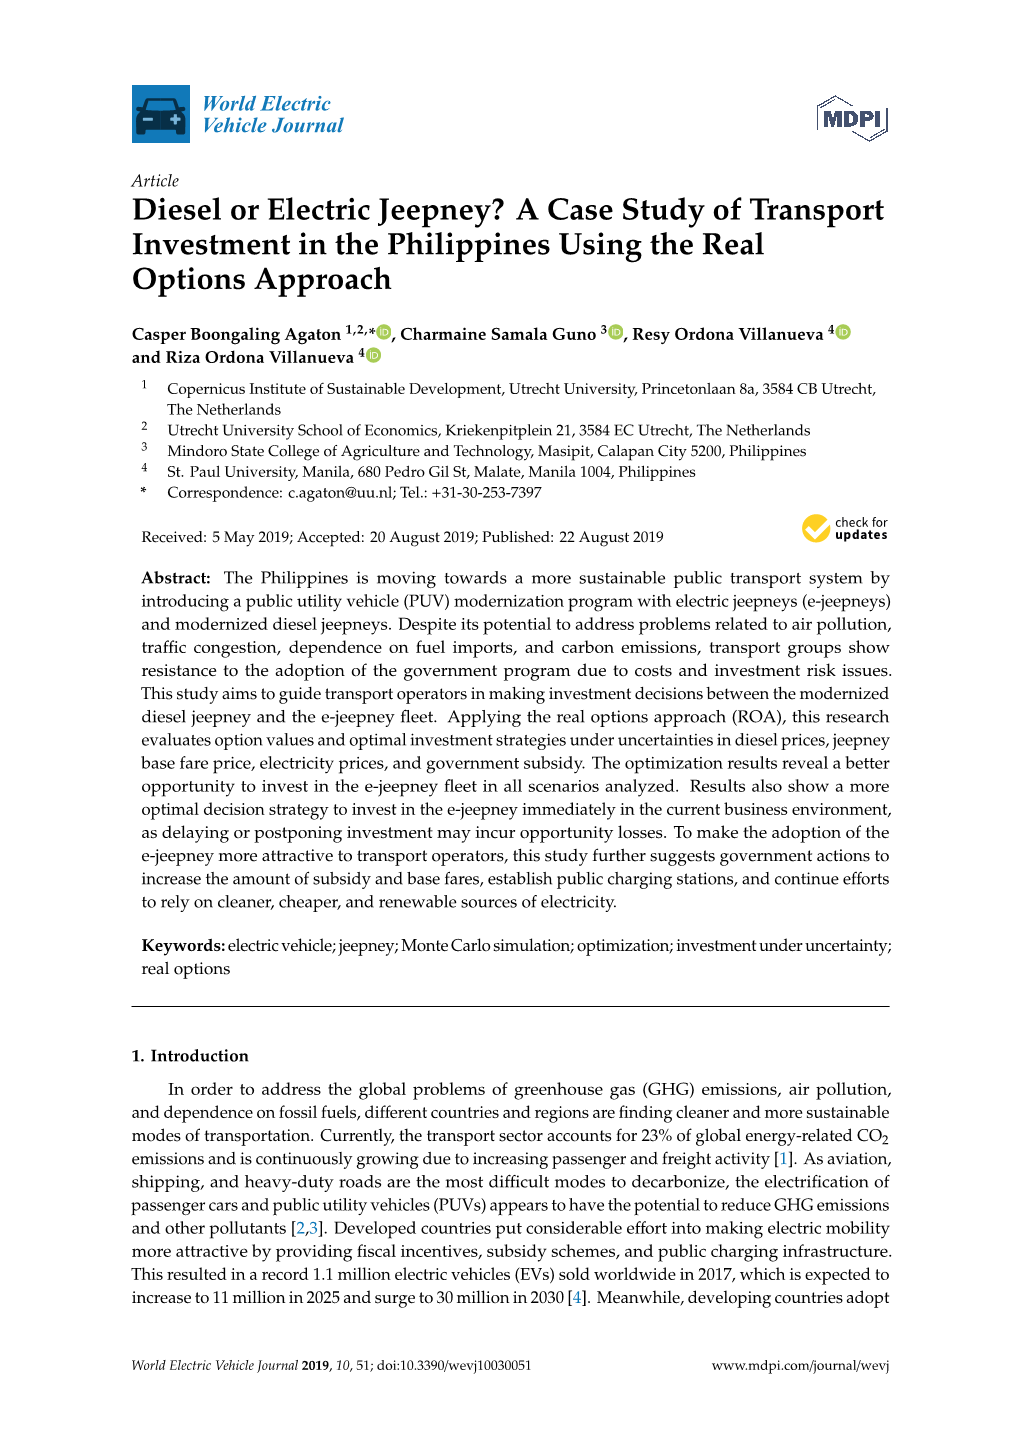 Diesel Or Electric Jeepney? a Case Study of Transport Investment in the Philippines Using the Real Options Approach